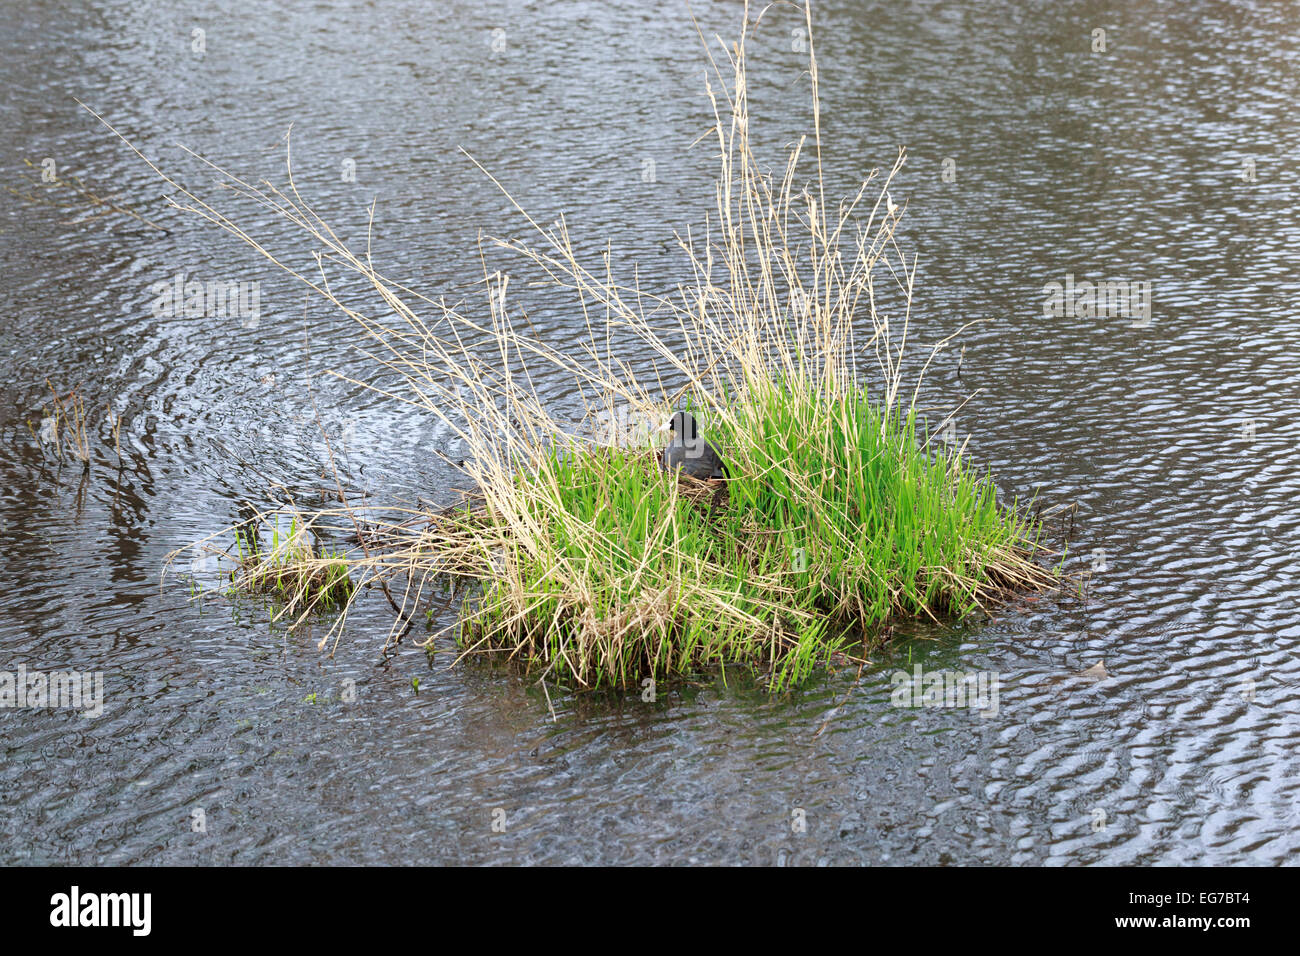 Fulica atra. The nest of the Common Coot in nature. Wildeshausen (Low Saxon: Wilshusen), Lower Saxony, Germany. Stock Photo